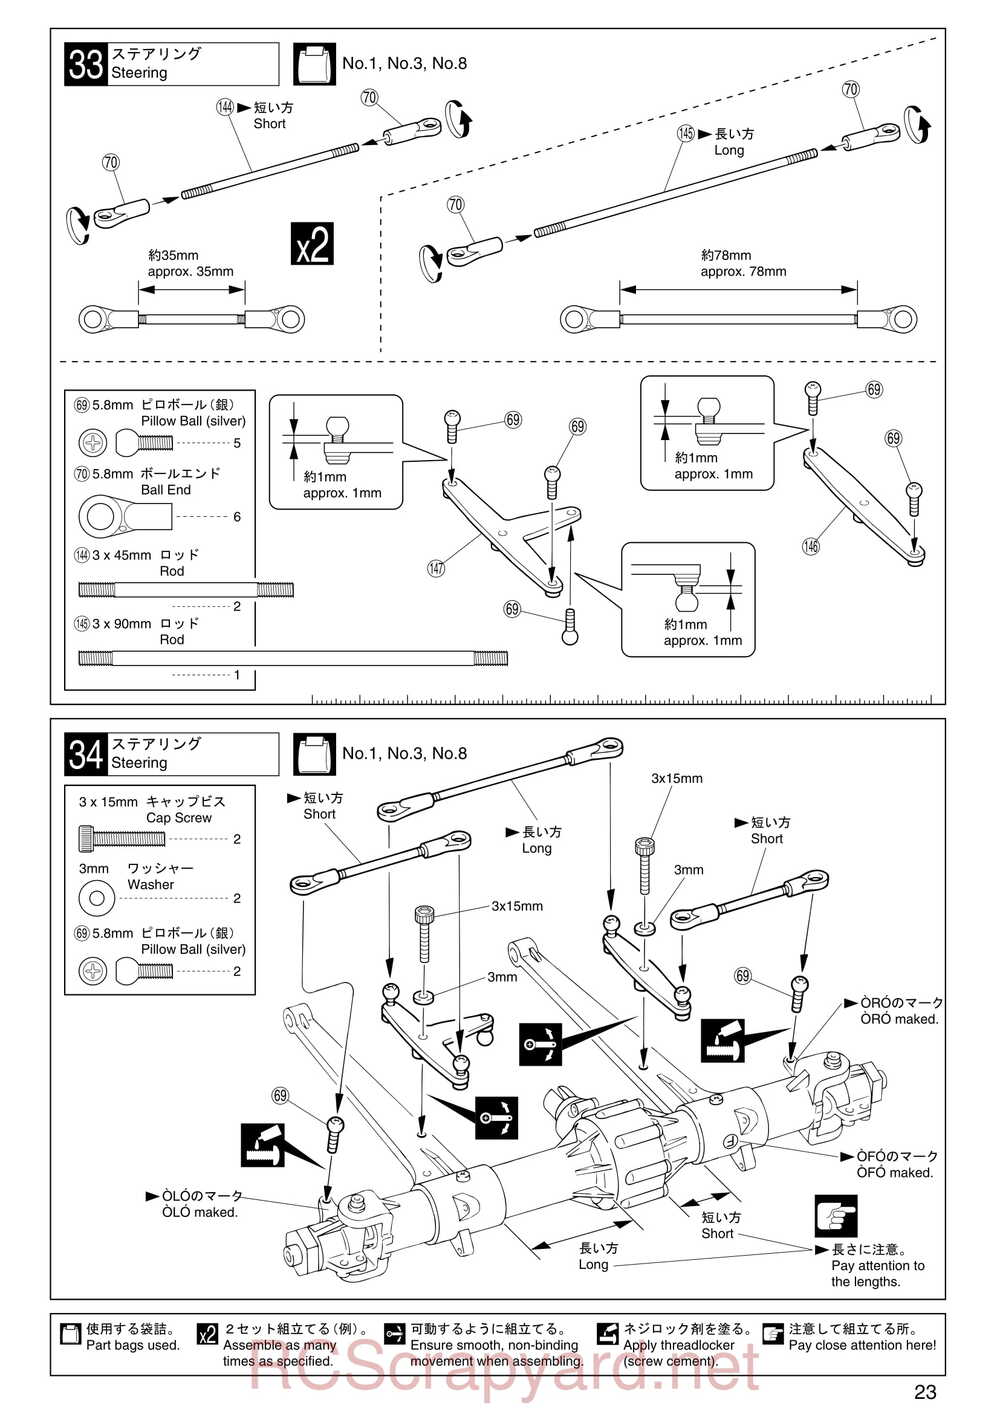 Kyosho - 31224 - Mad-Armour - Manual - Page 23